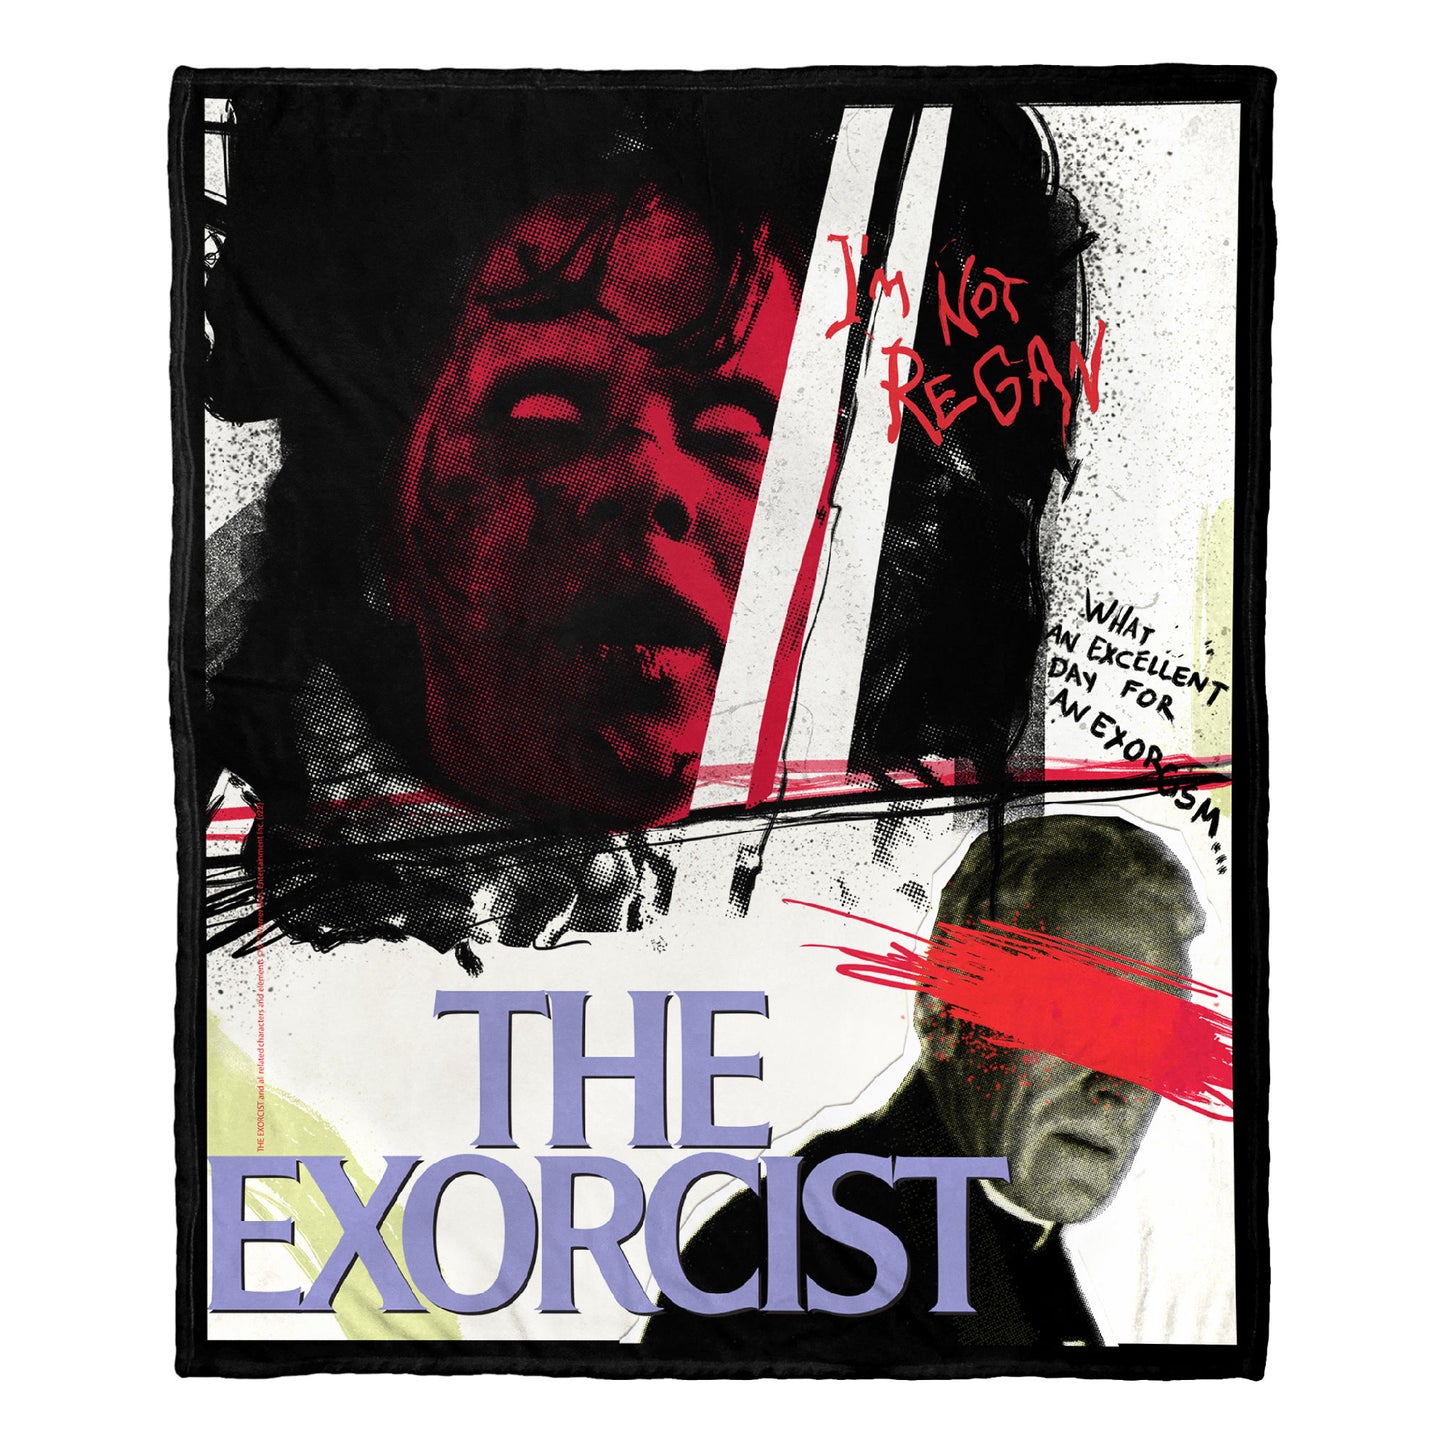 Exorcist Time for an Exorcism Throw Blanket 50"x60"